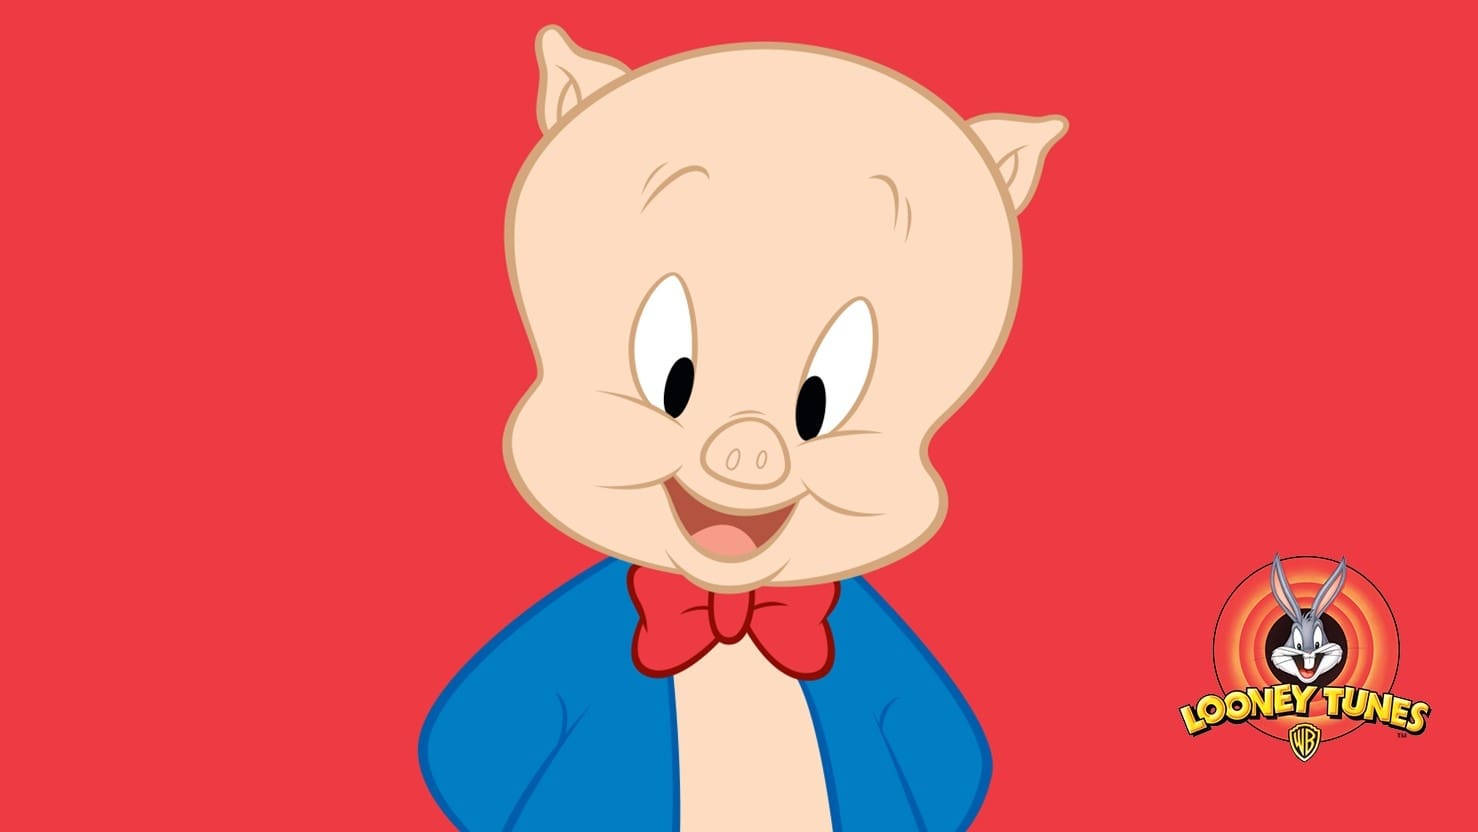 Porky Pig Solo Red Poster Background